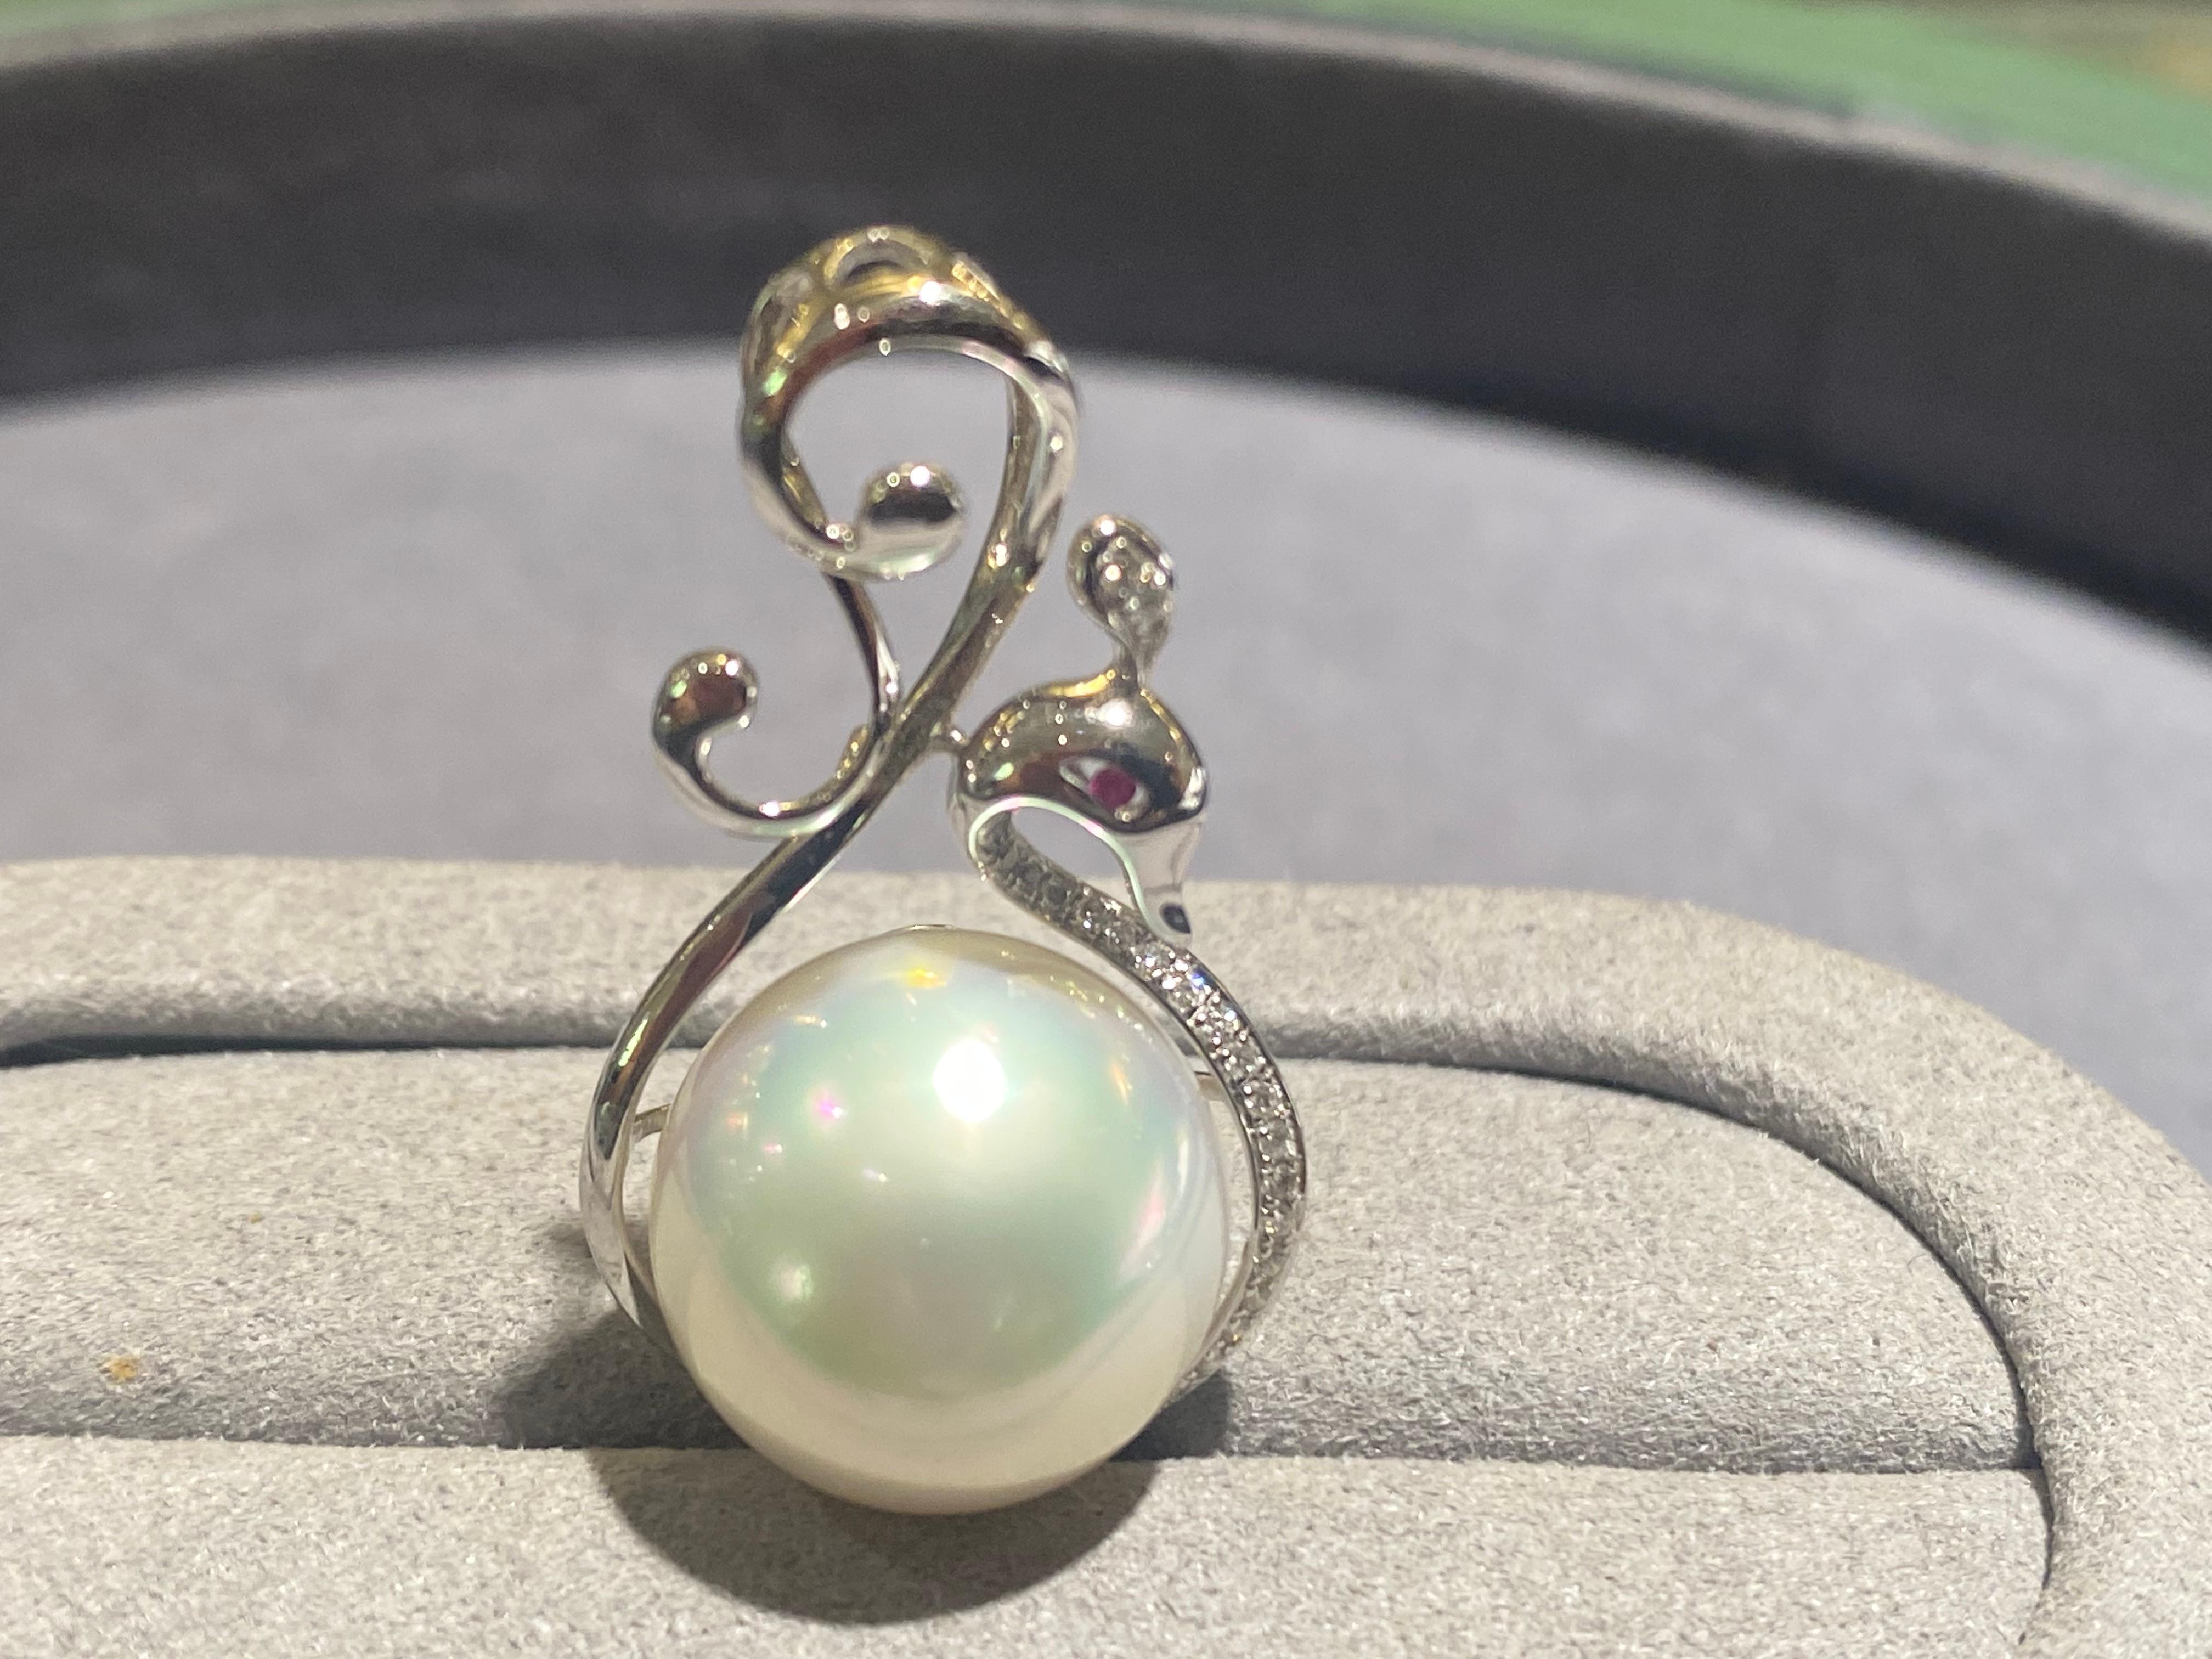 A 14.5 mm Australian White South Sea Pearl was set at the lower end of the pendant and it resembles the body of a swan. The chest and the feather on top of the swan was set with micro diamond pave. The White Australian South Sea Pearl is almost